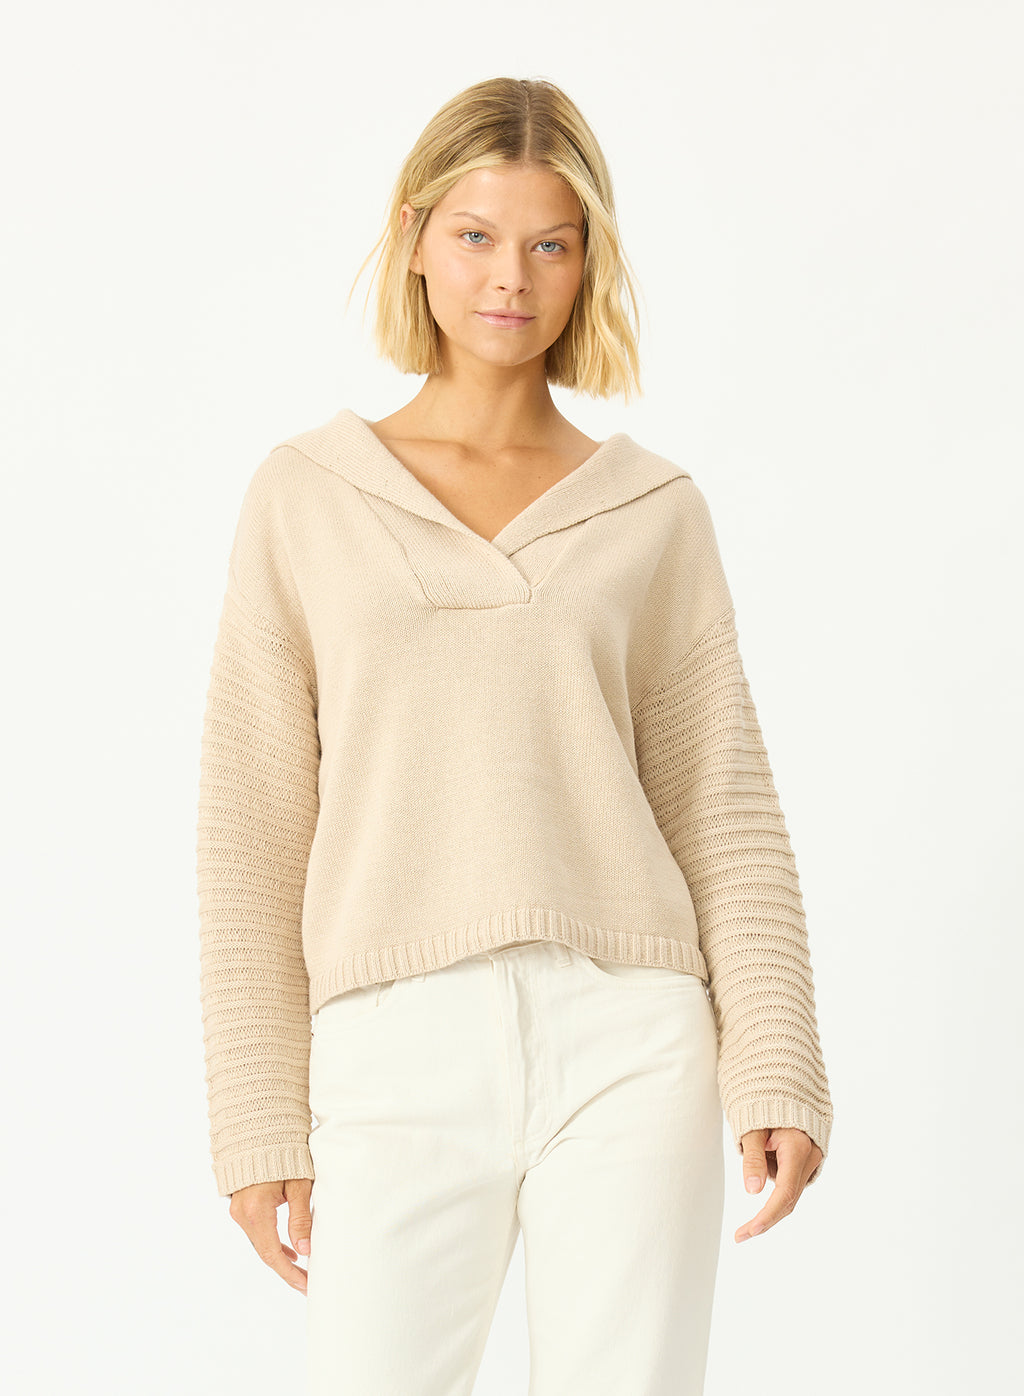 Stitches + Stripes Quincy Hooded Sweater in Grain